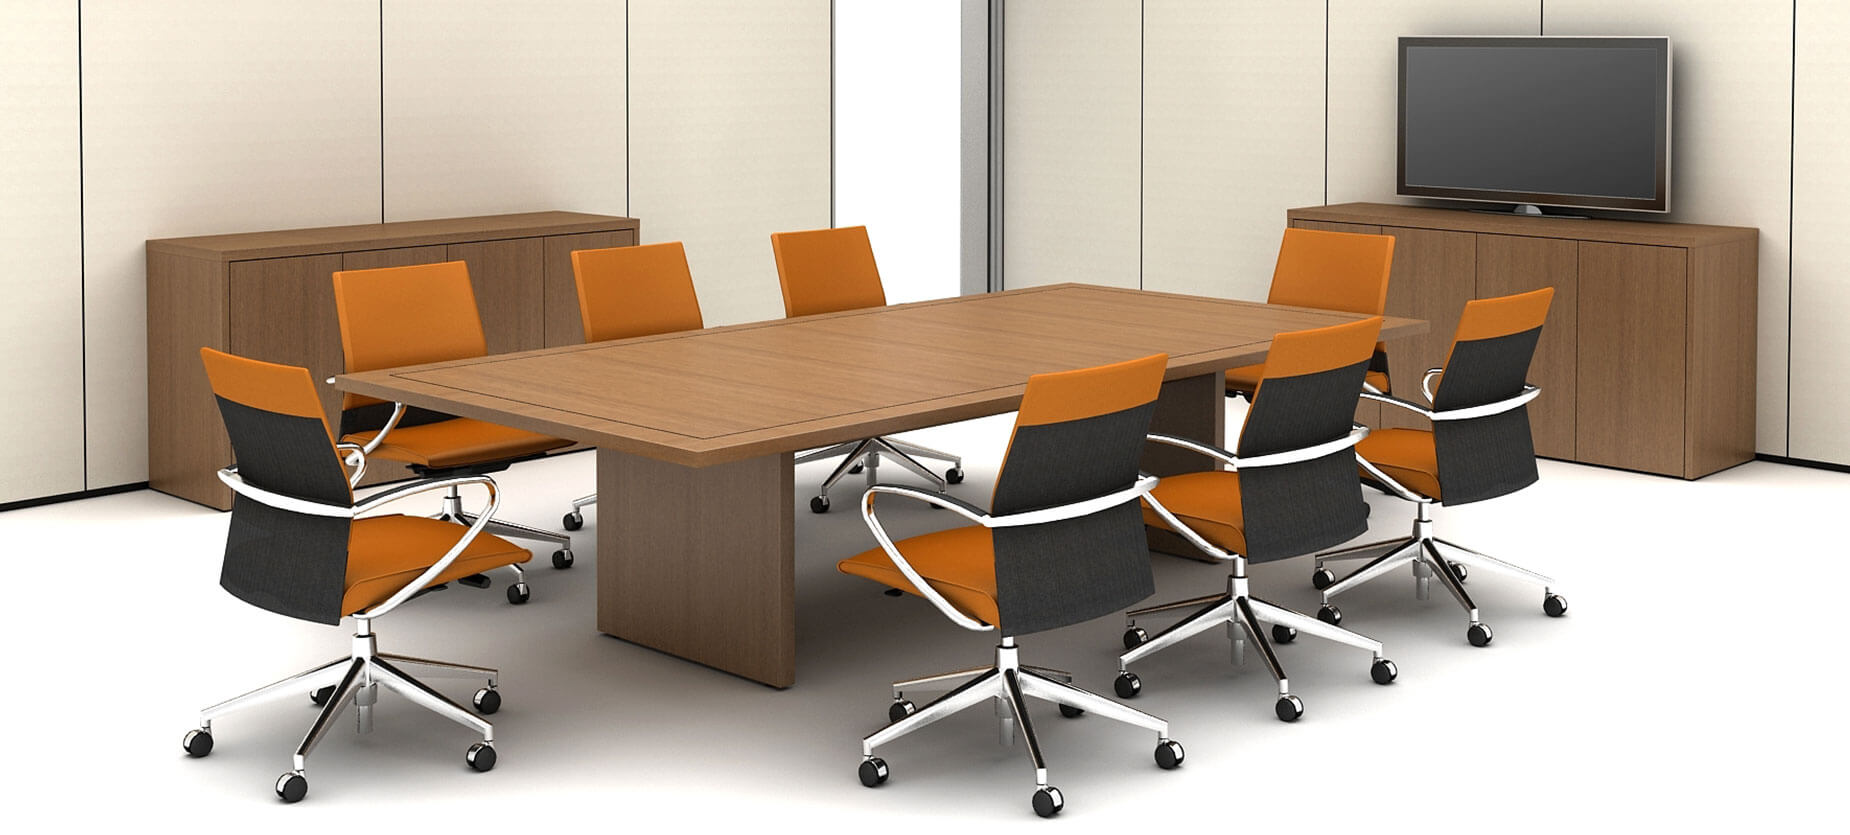 Wood Conference Table